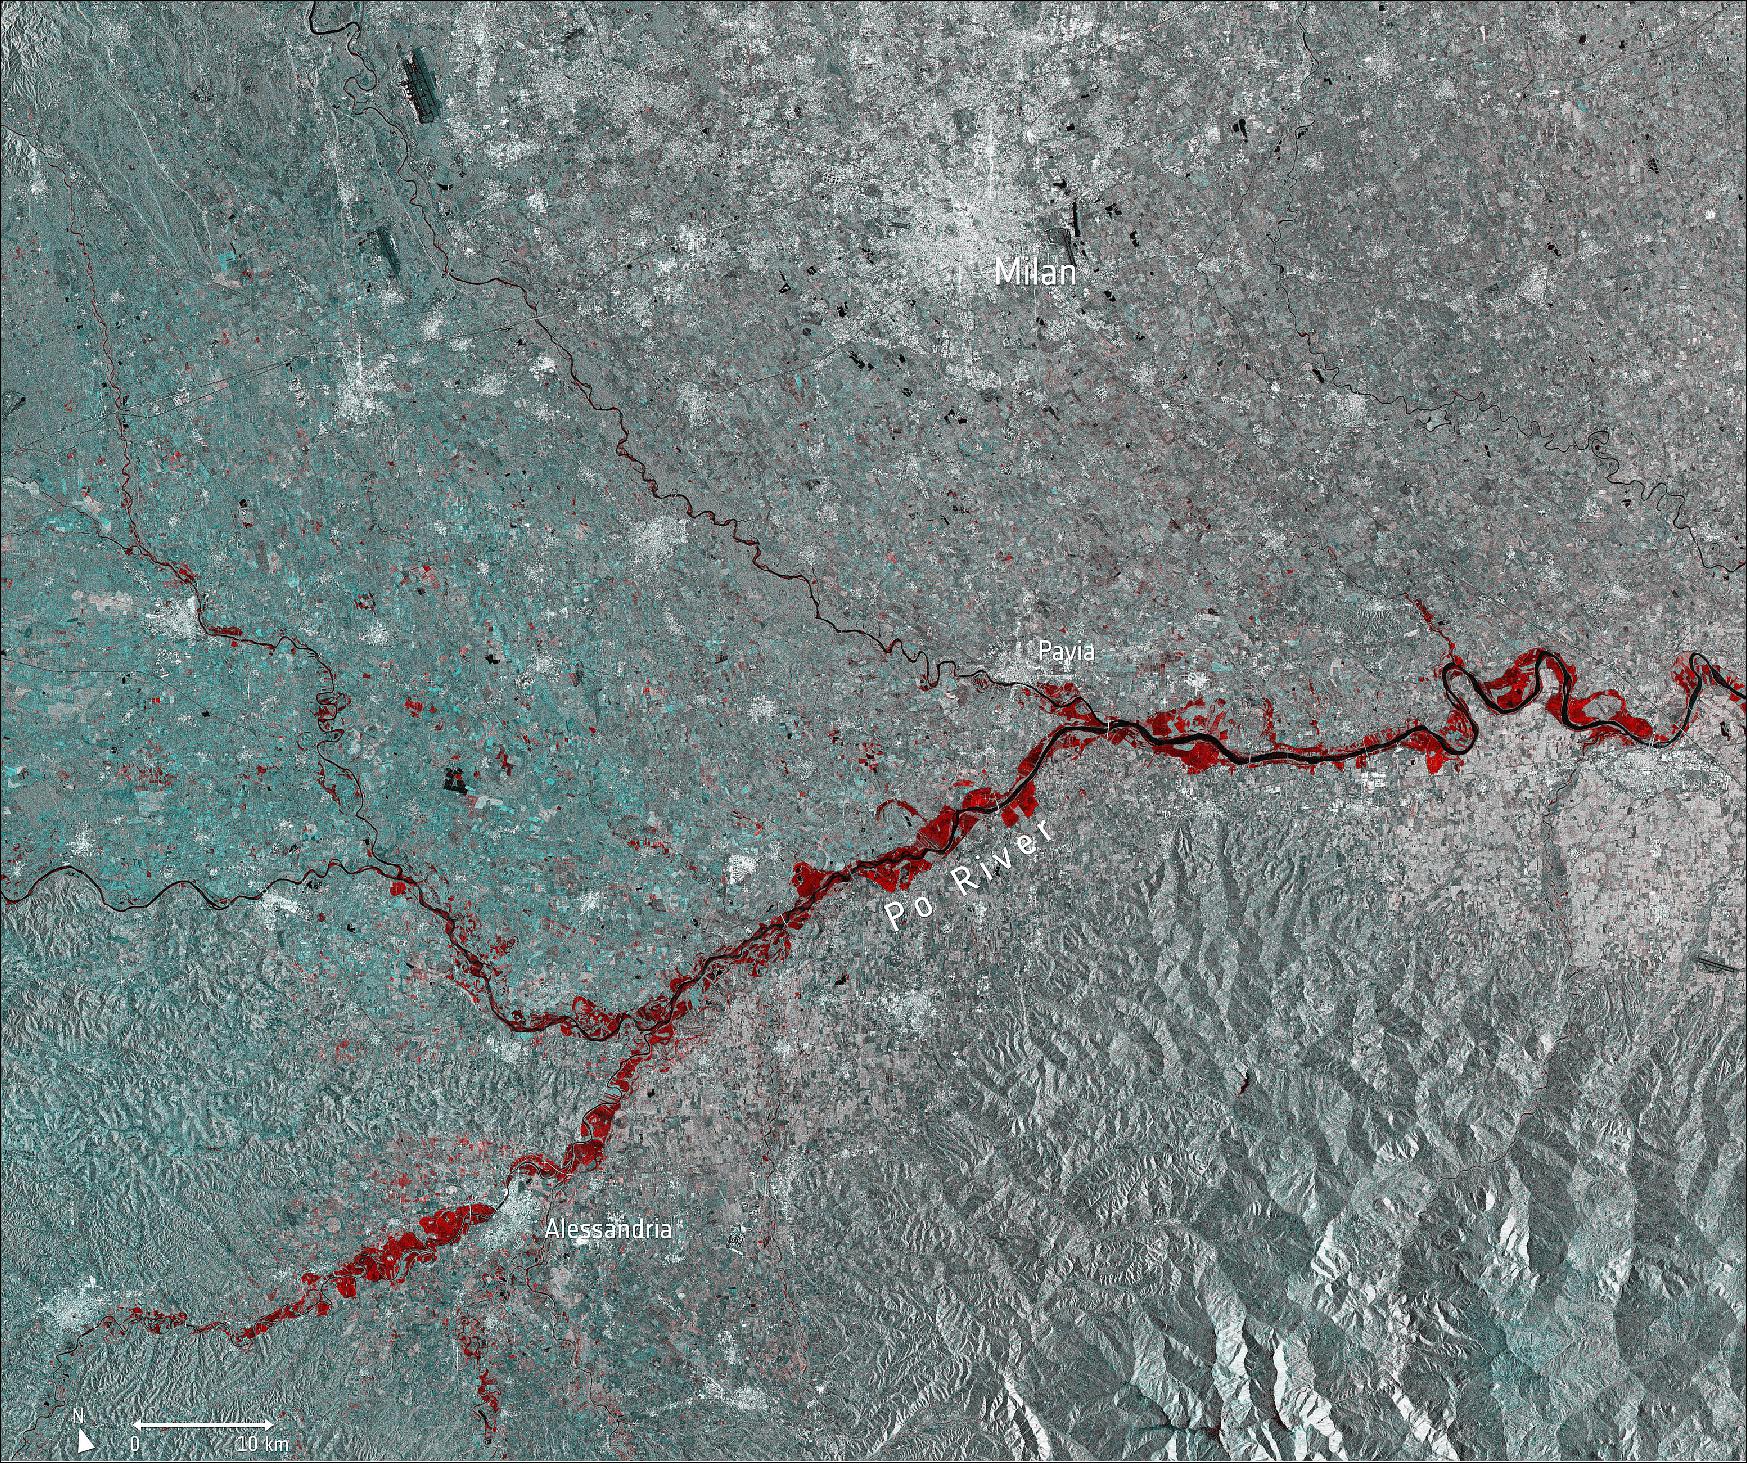 Figure 2: This multi-temporal image uses two separate images captured by the Copernicus Sentinel-1 mission on 13 November and 25 November. The flooded areas can be seen depicted in red, the Po River in black, and urban areas in white (image credit: ESA, the image contains modified Copernicus Sentinel data (2019), processed by ESA, CC BY-SA 3.0 IGO)